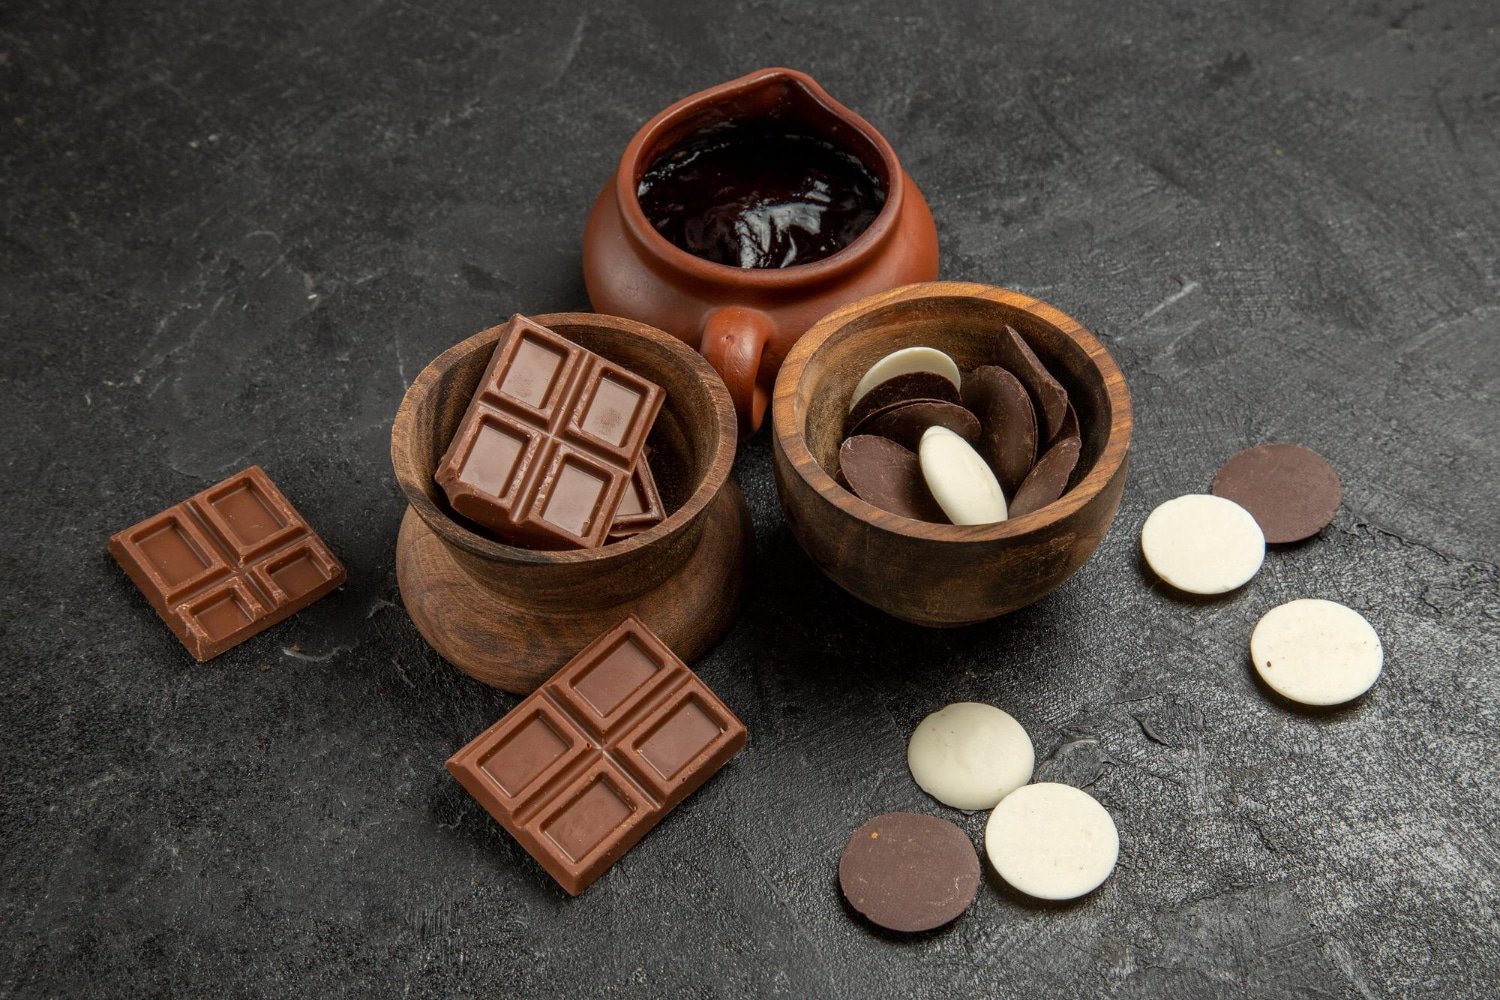 Compartés Artisanal Chocolate with a Modern Twist